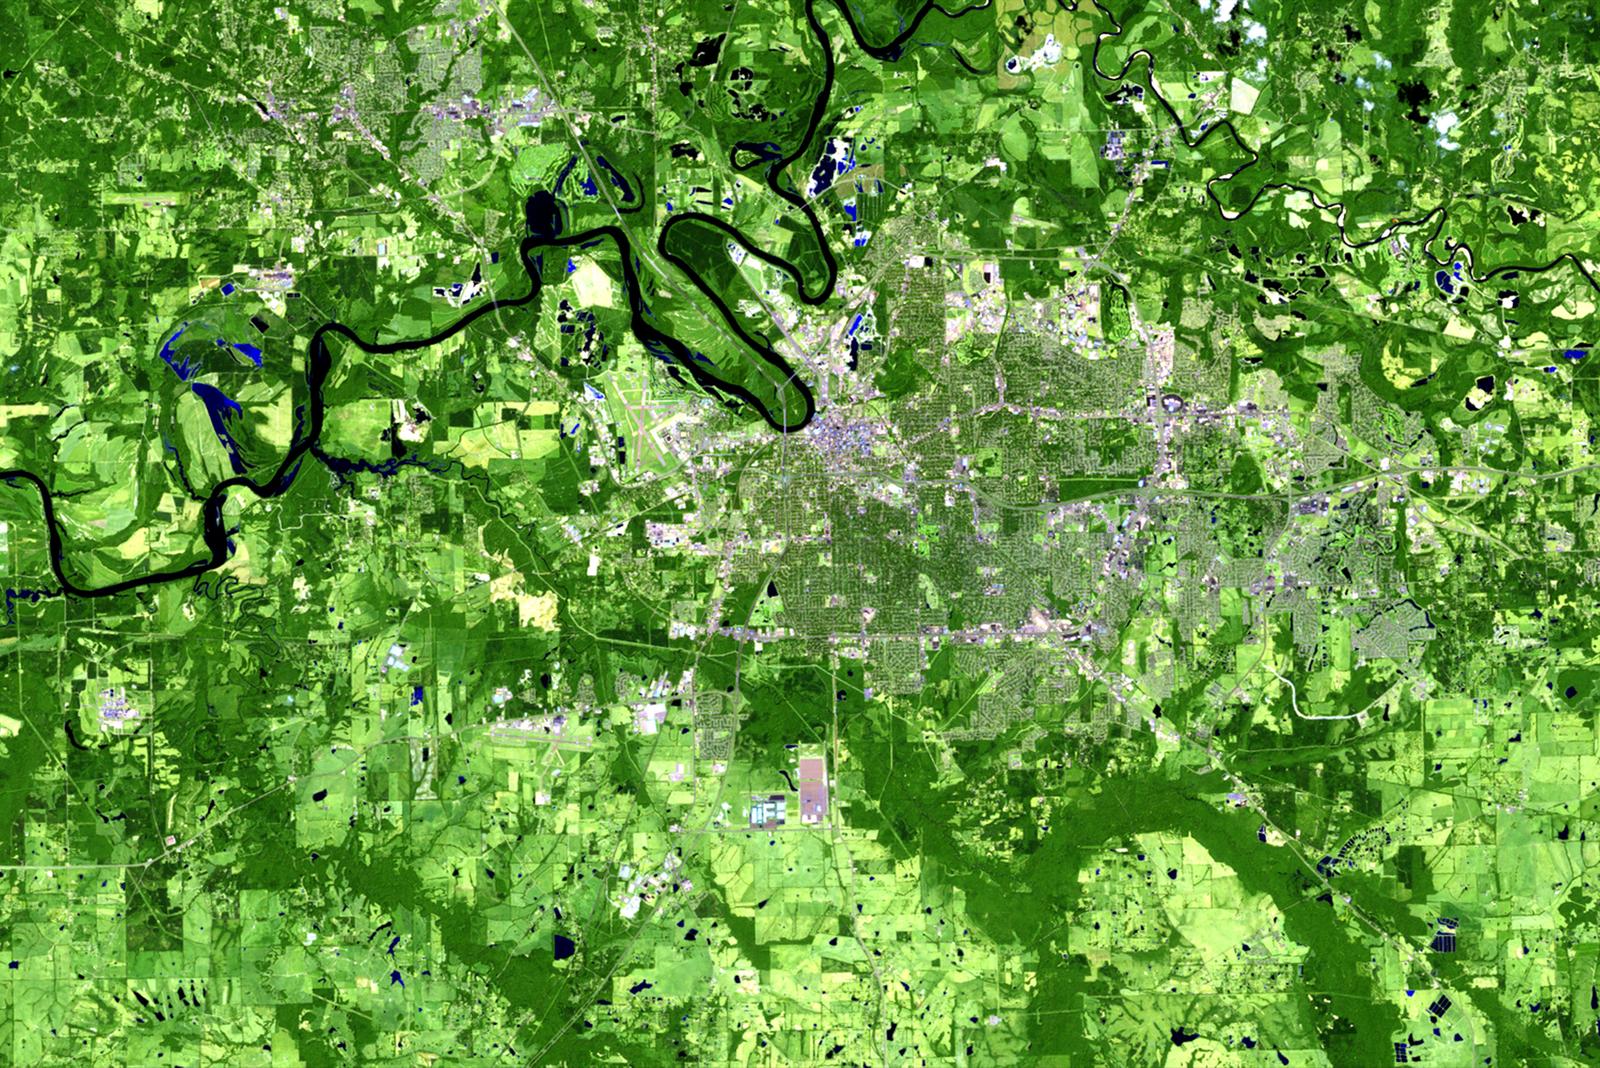 Image of the Week - Urban Growth of the Montgomery, Alabama Area